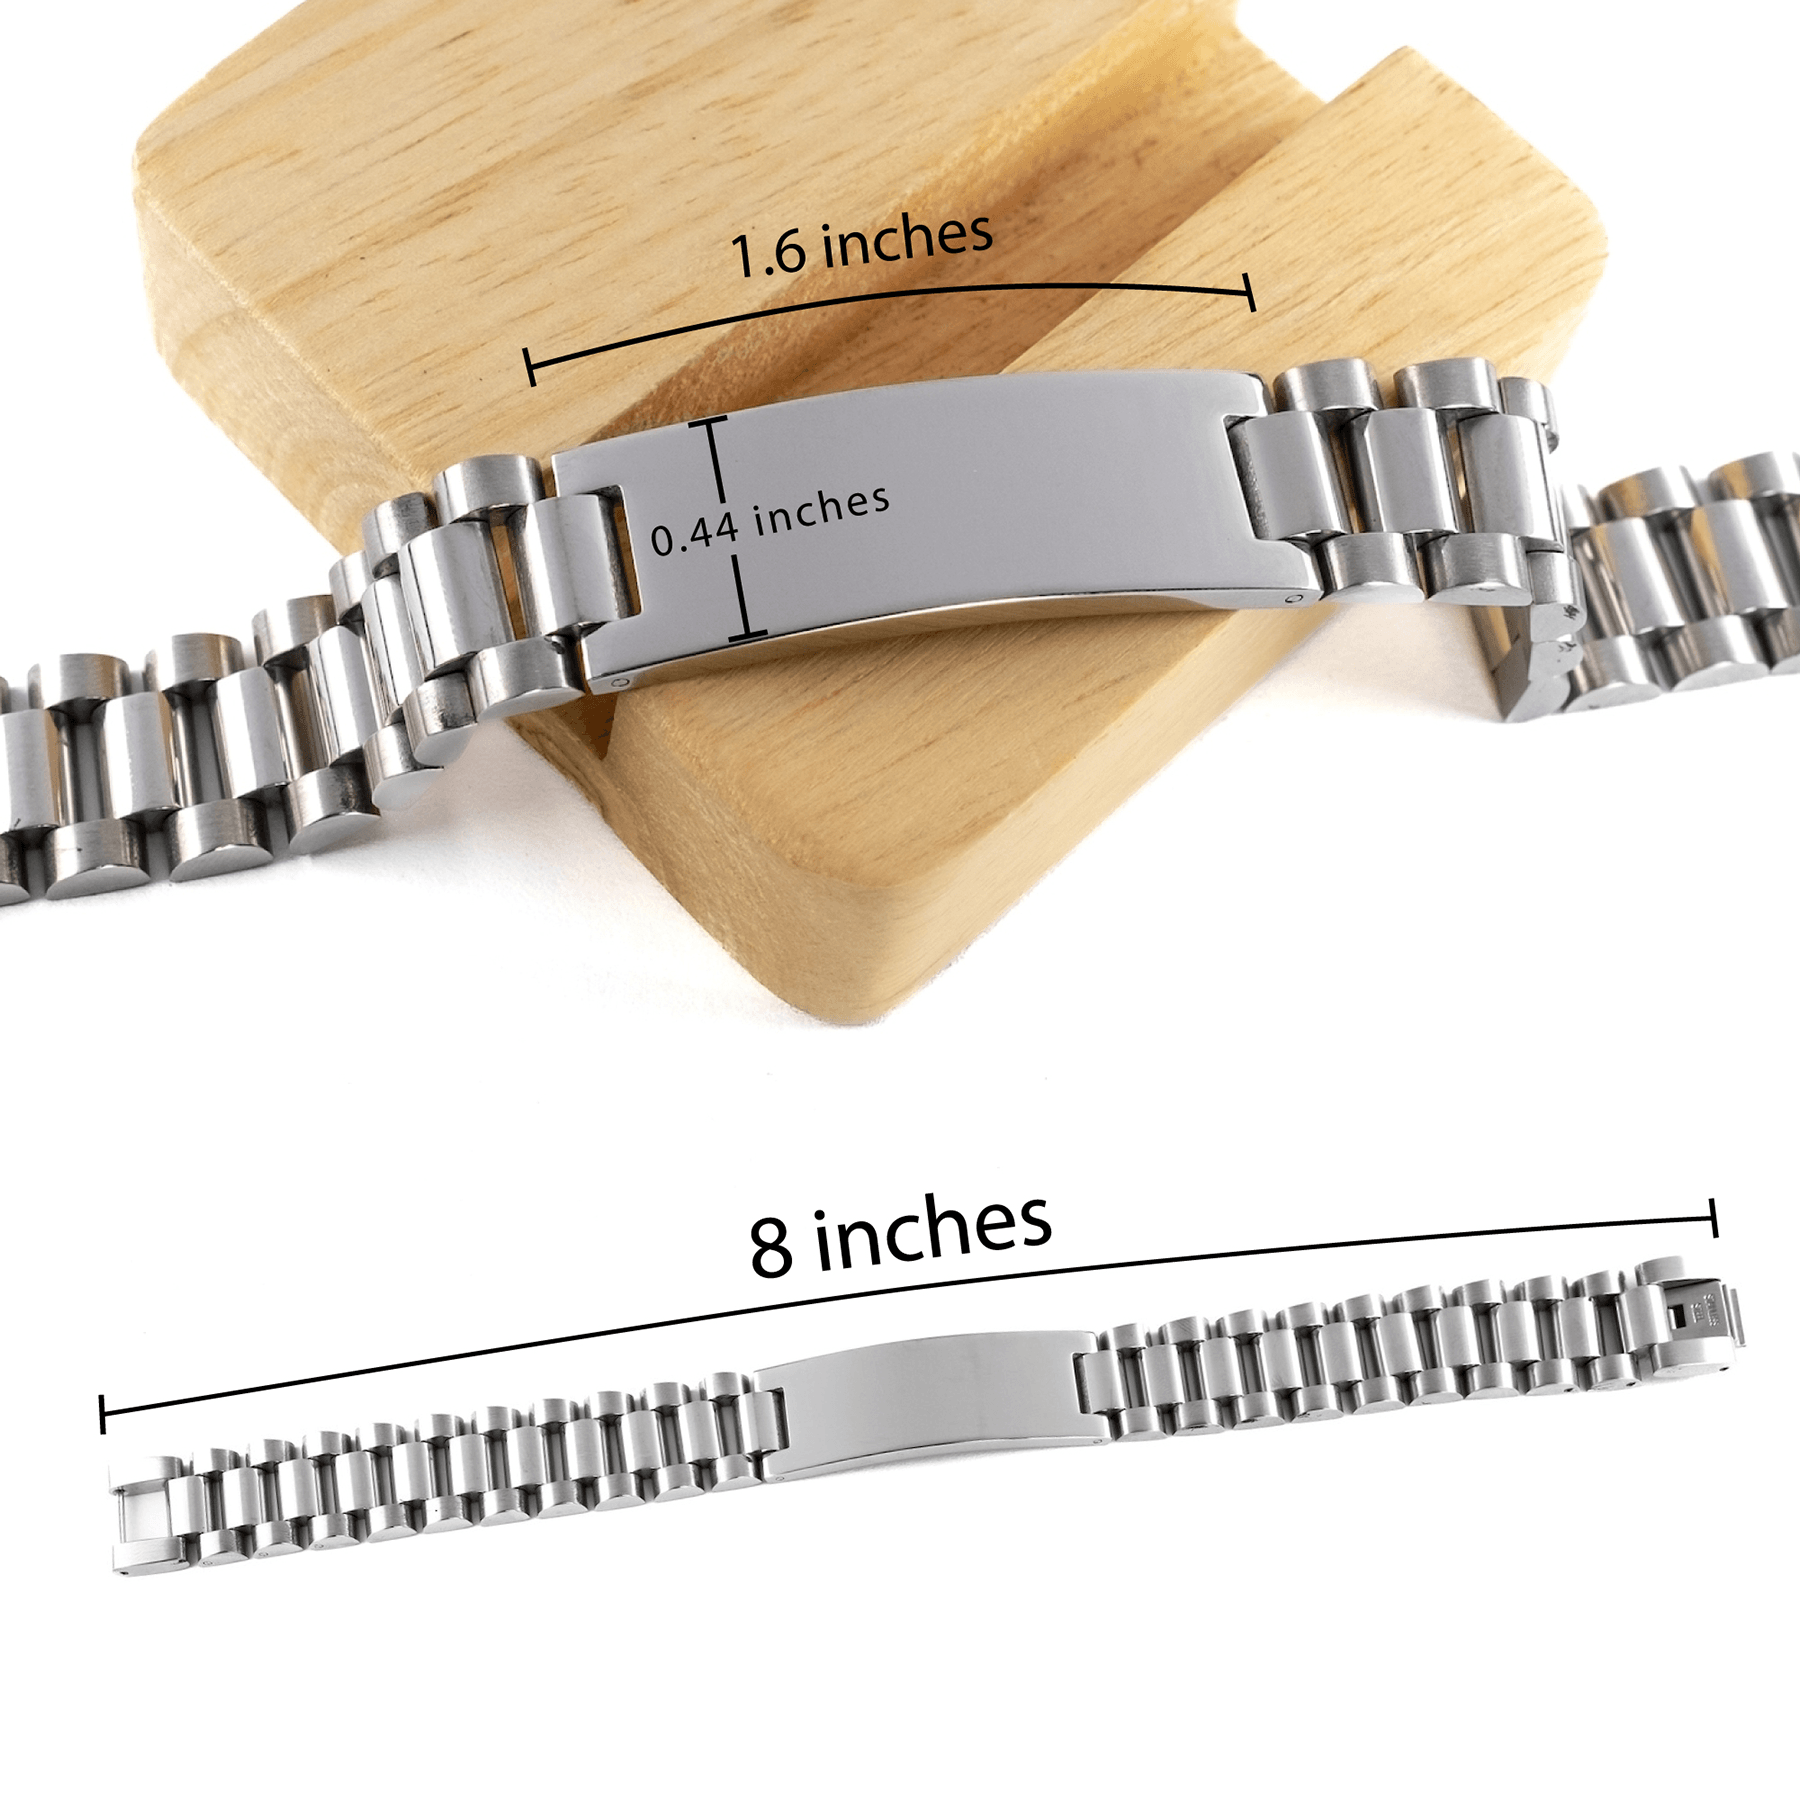 Remarkable Civil Engineer Gifts, Your dedication and hard work, Inspirational Birthday Christmas Unique Ladder Stainless Steel Bracelet For Civil Engineer, Coworkers, Men, Women, Friends - Mallard Moon Gift Shop